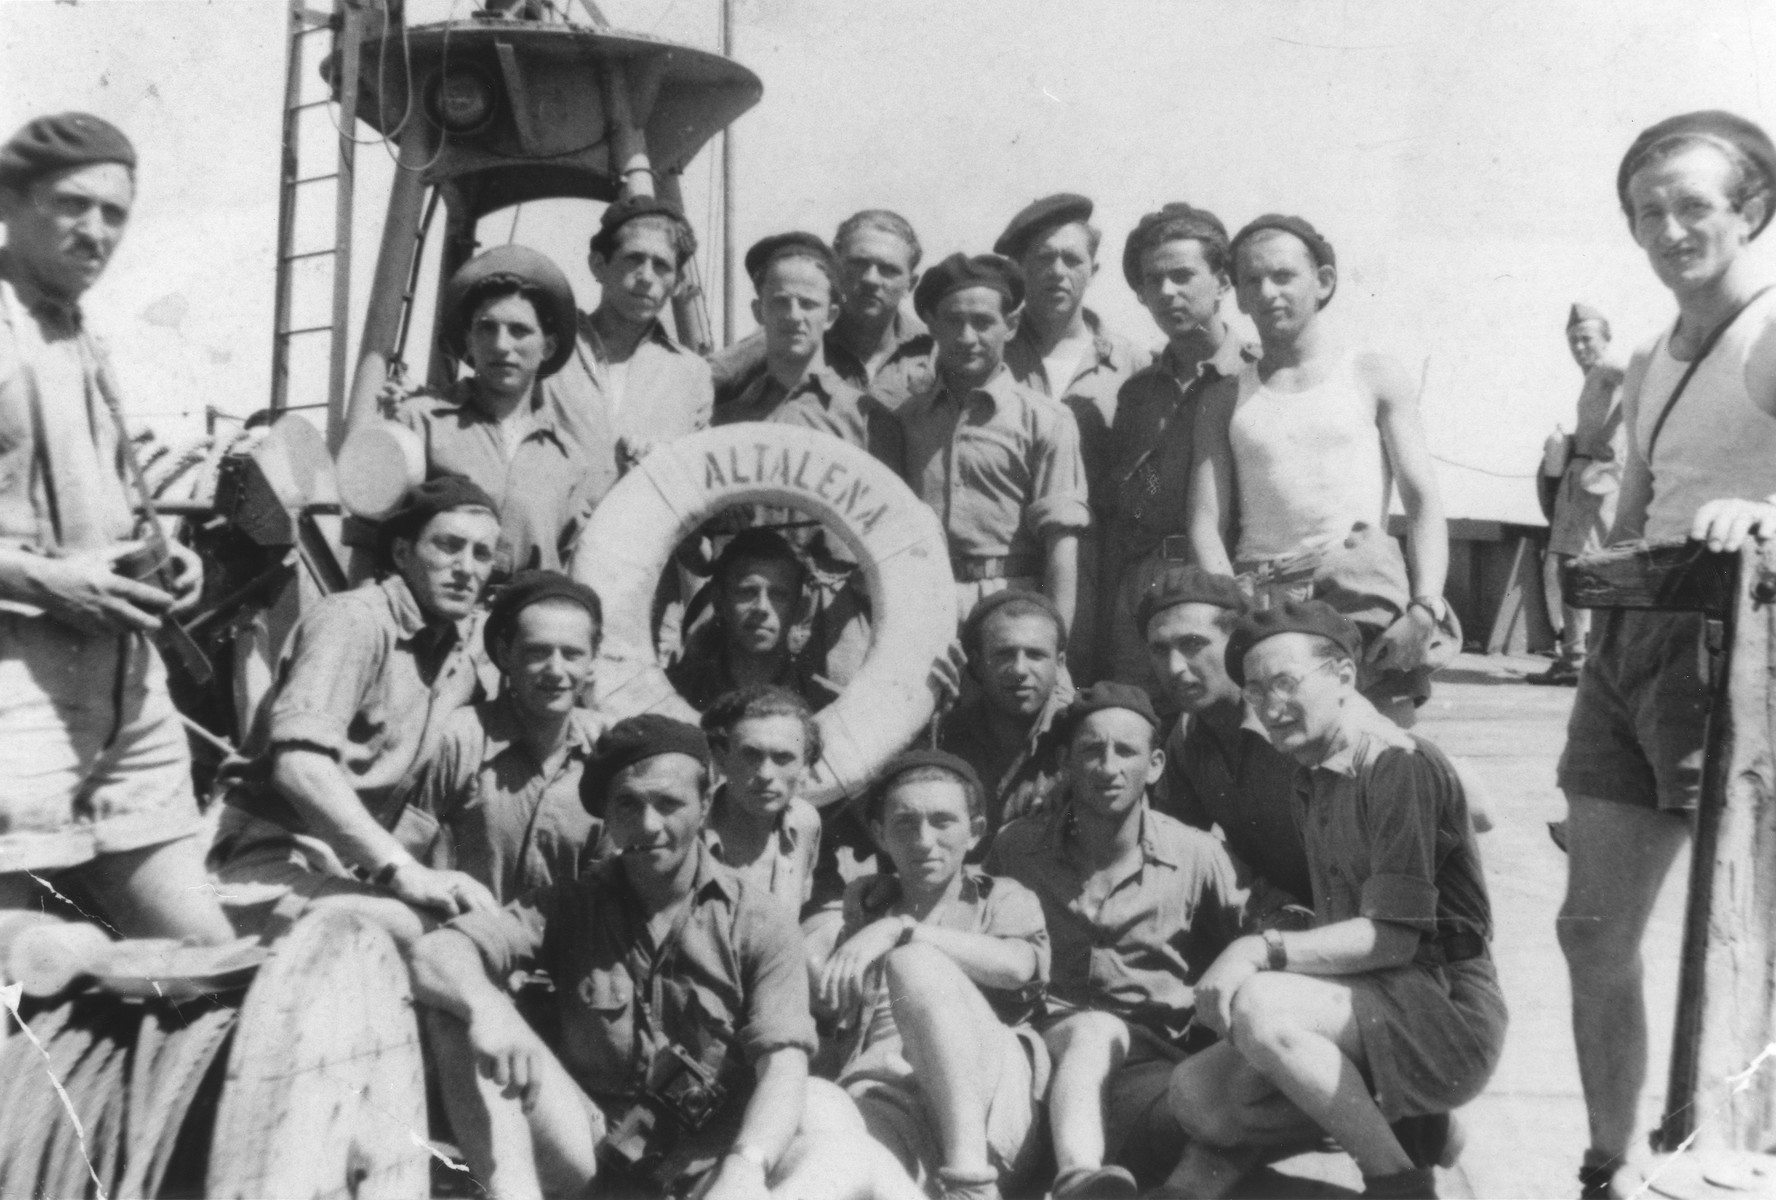 Group portrait of Jewish DPs aboard the Altalena, an immigrant ship bound for Israel.